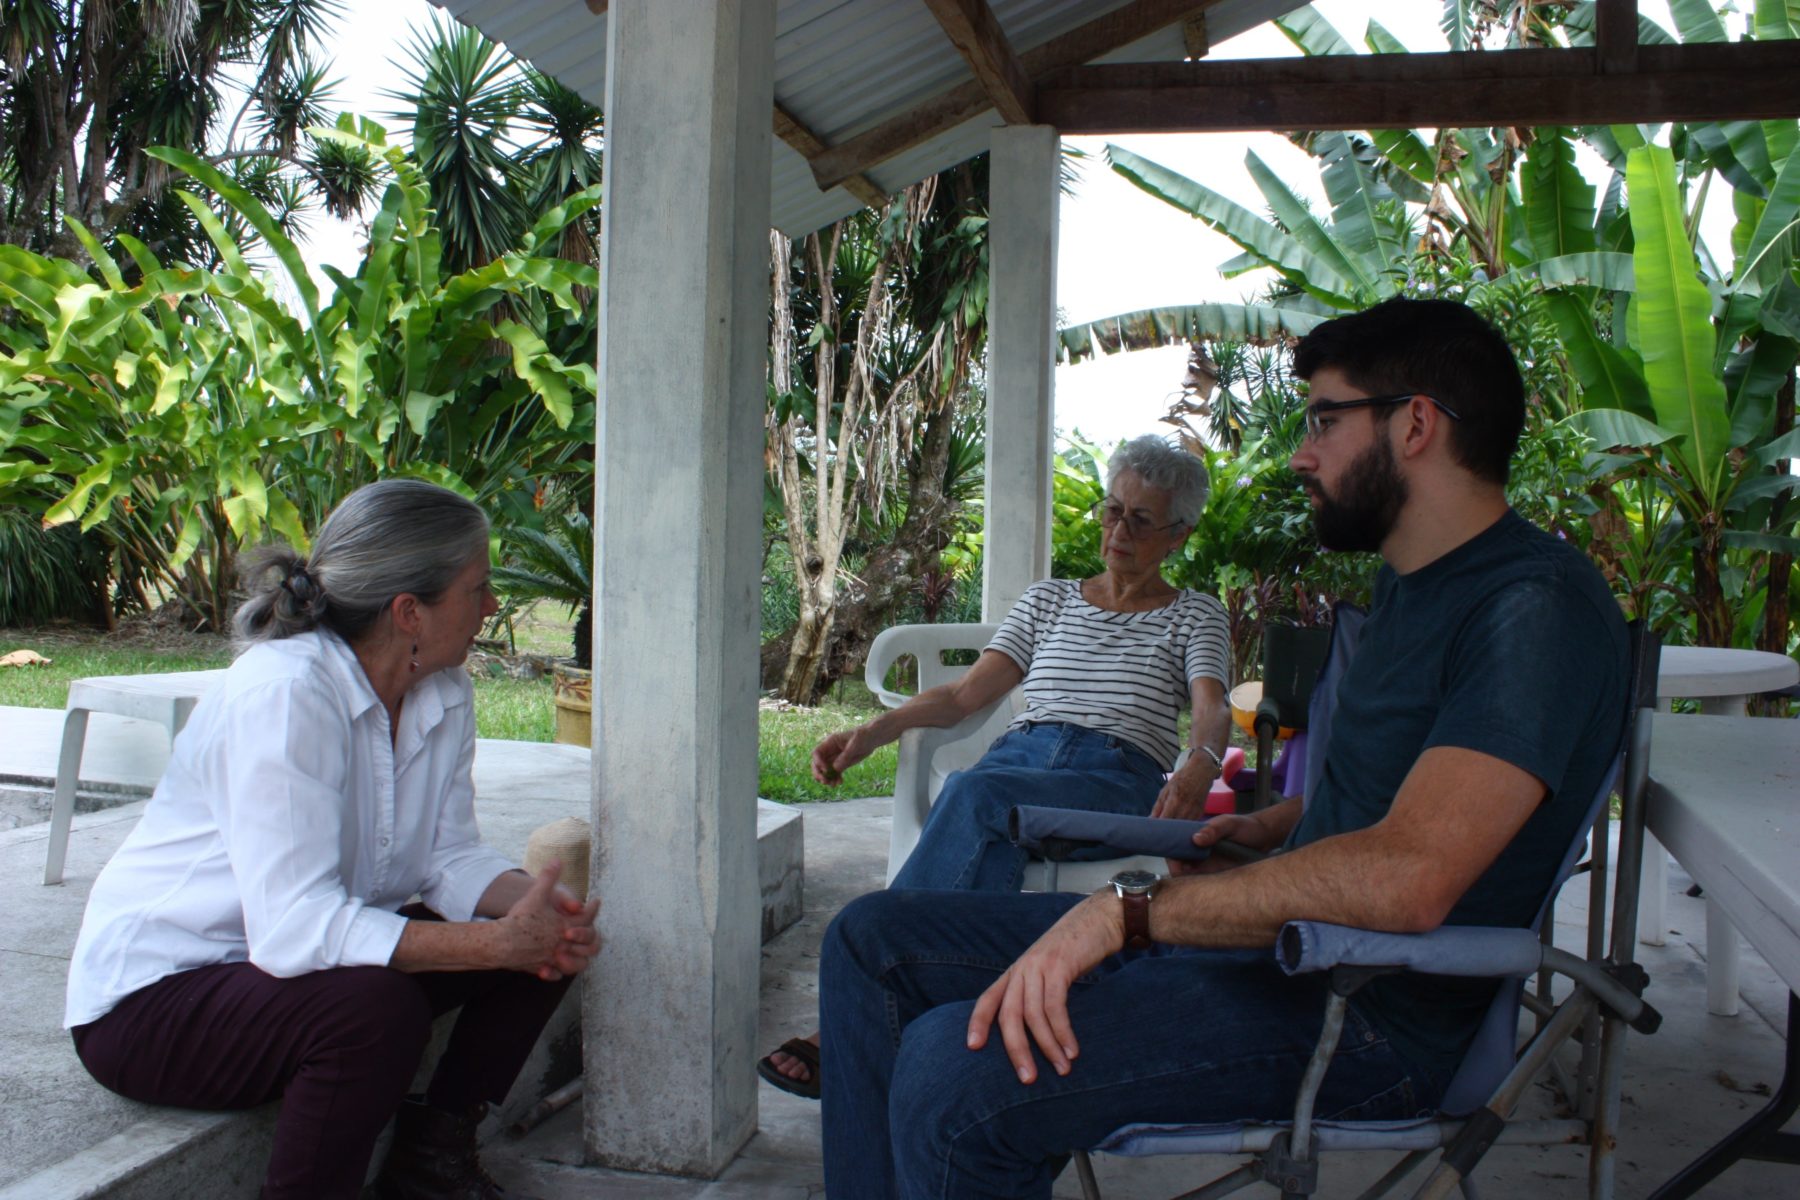 The Vizcaino family of Finca Esperanza established our understanding of mutually beneficial coffee sourcing.